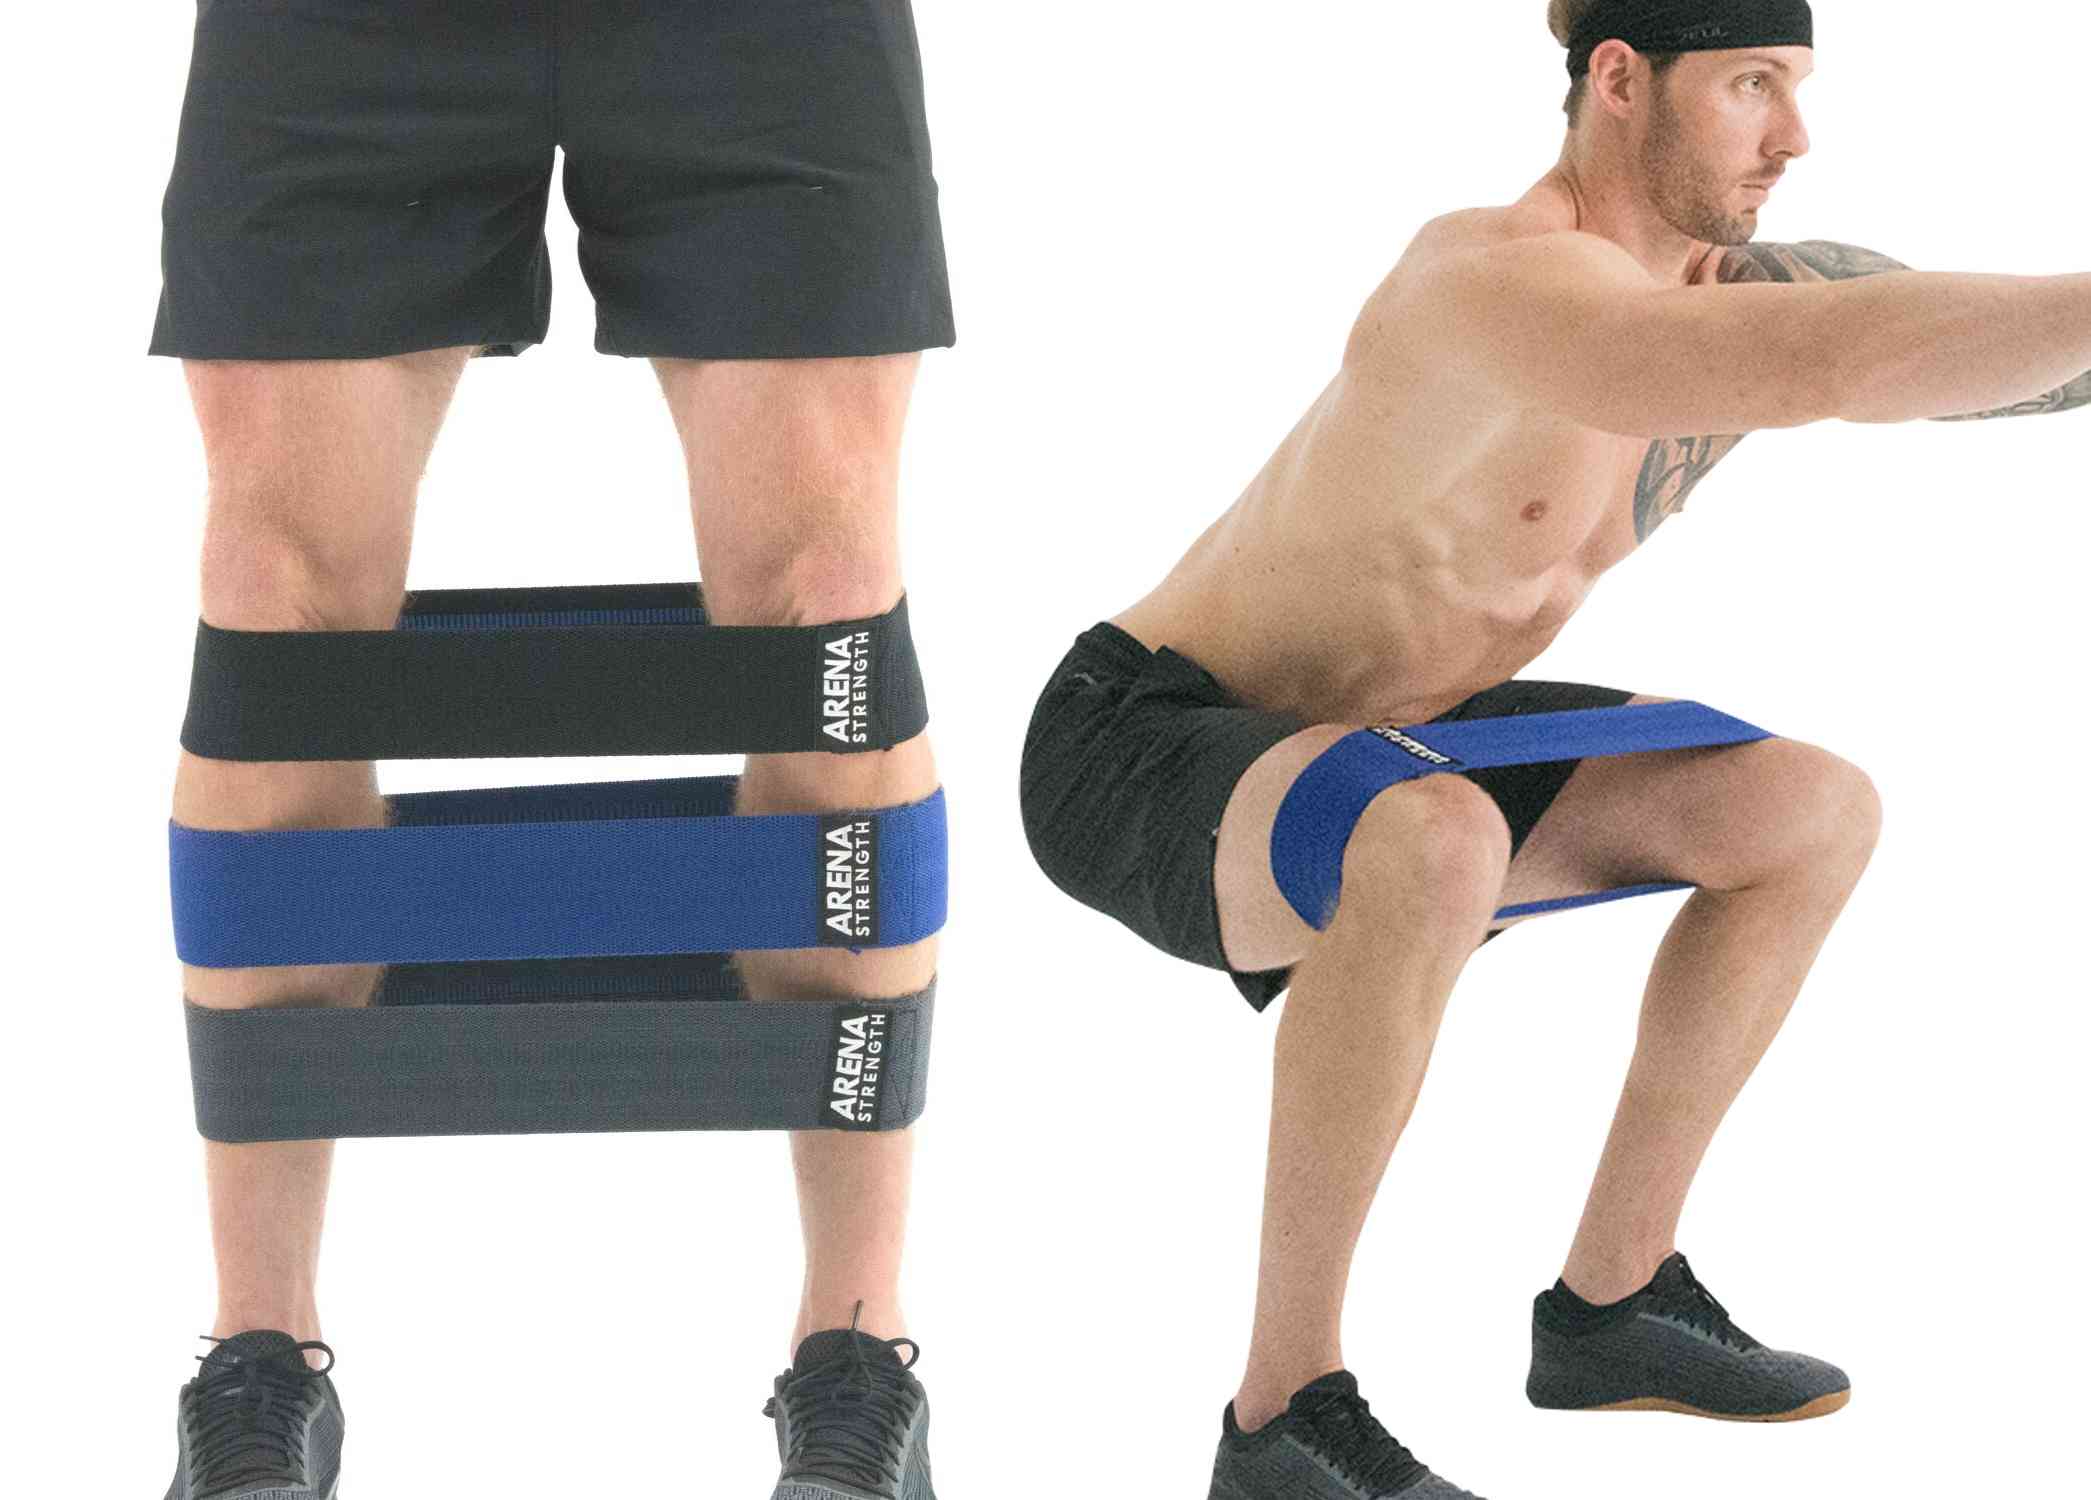 Best Resistance Bands that will NEVER Break or Roll by Arena Strength